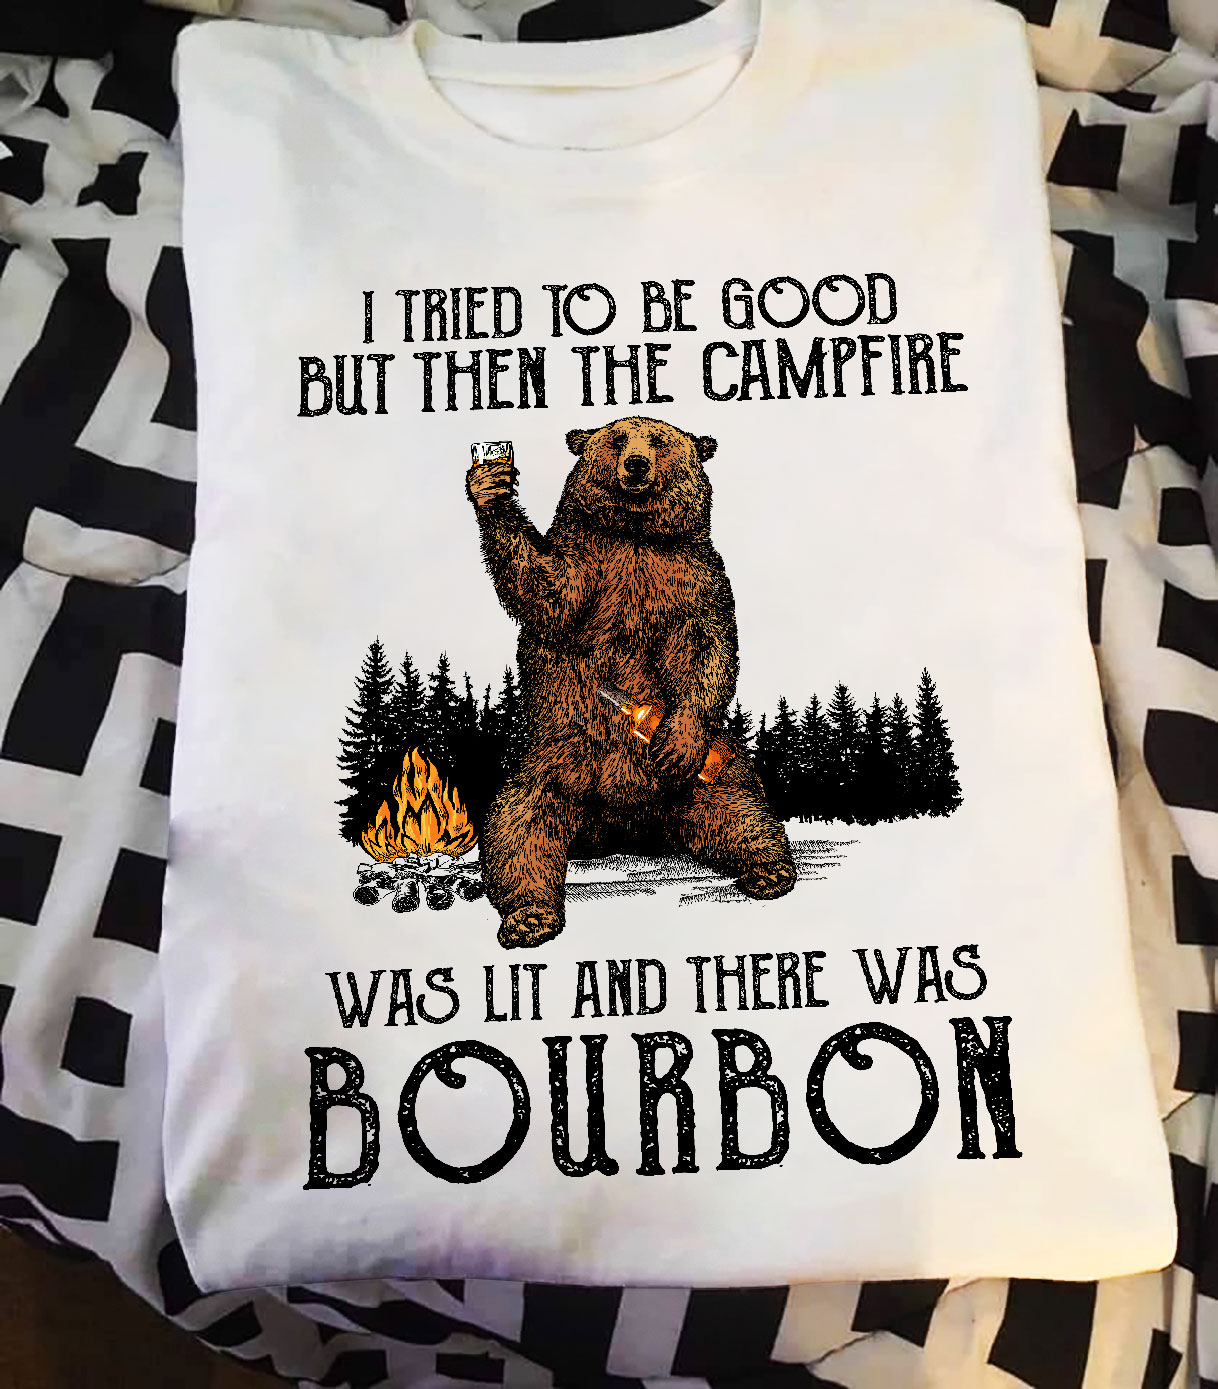 I tried to be good but then the campfire was lit and there was bourbon - bear picture